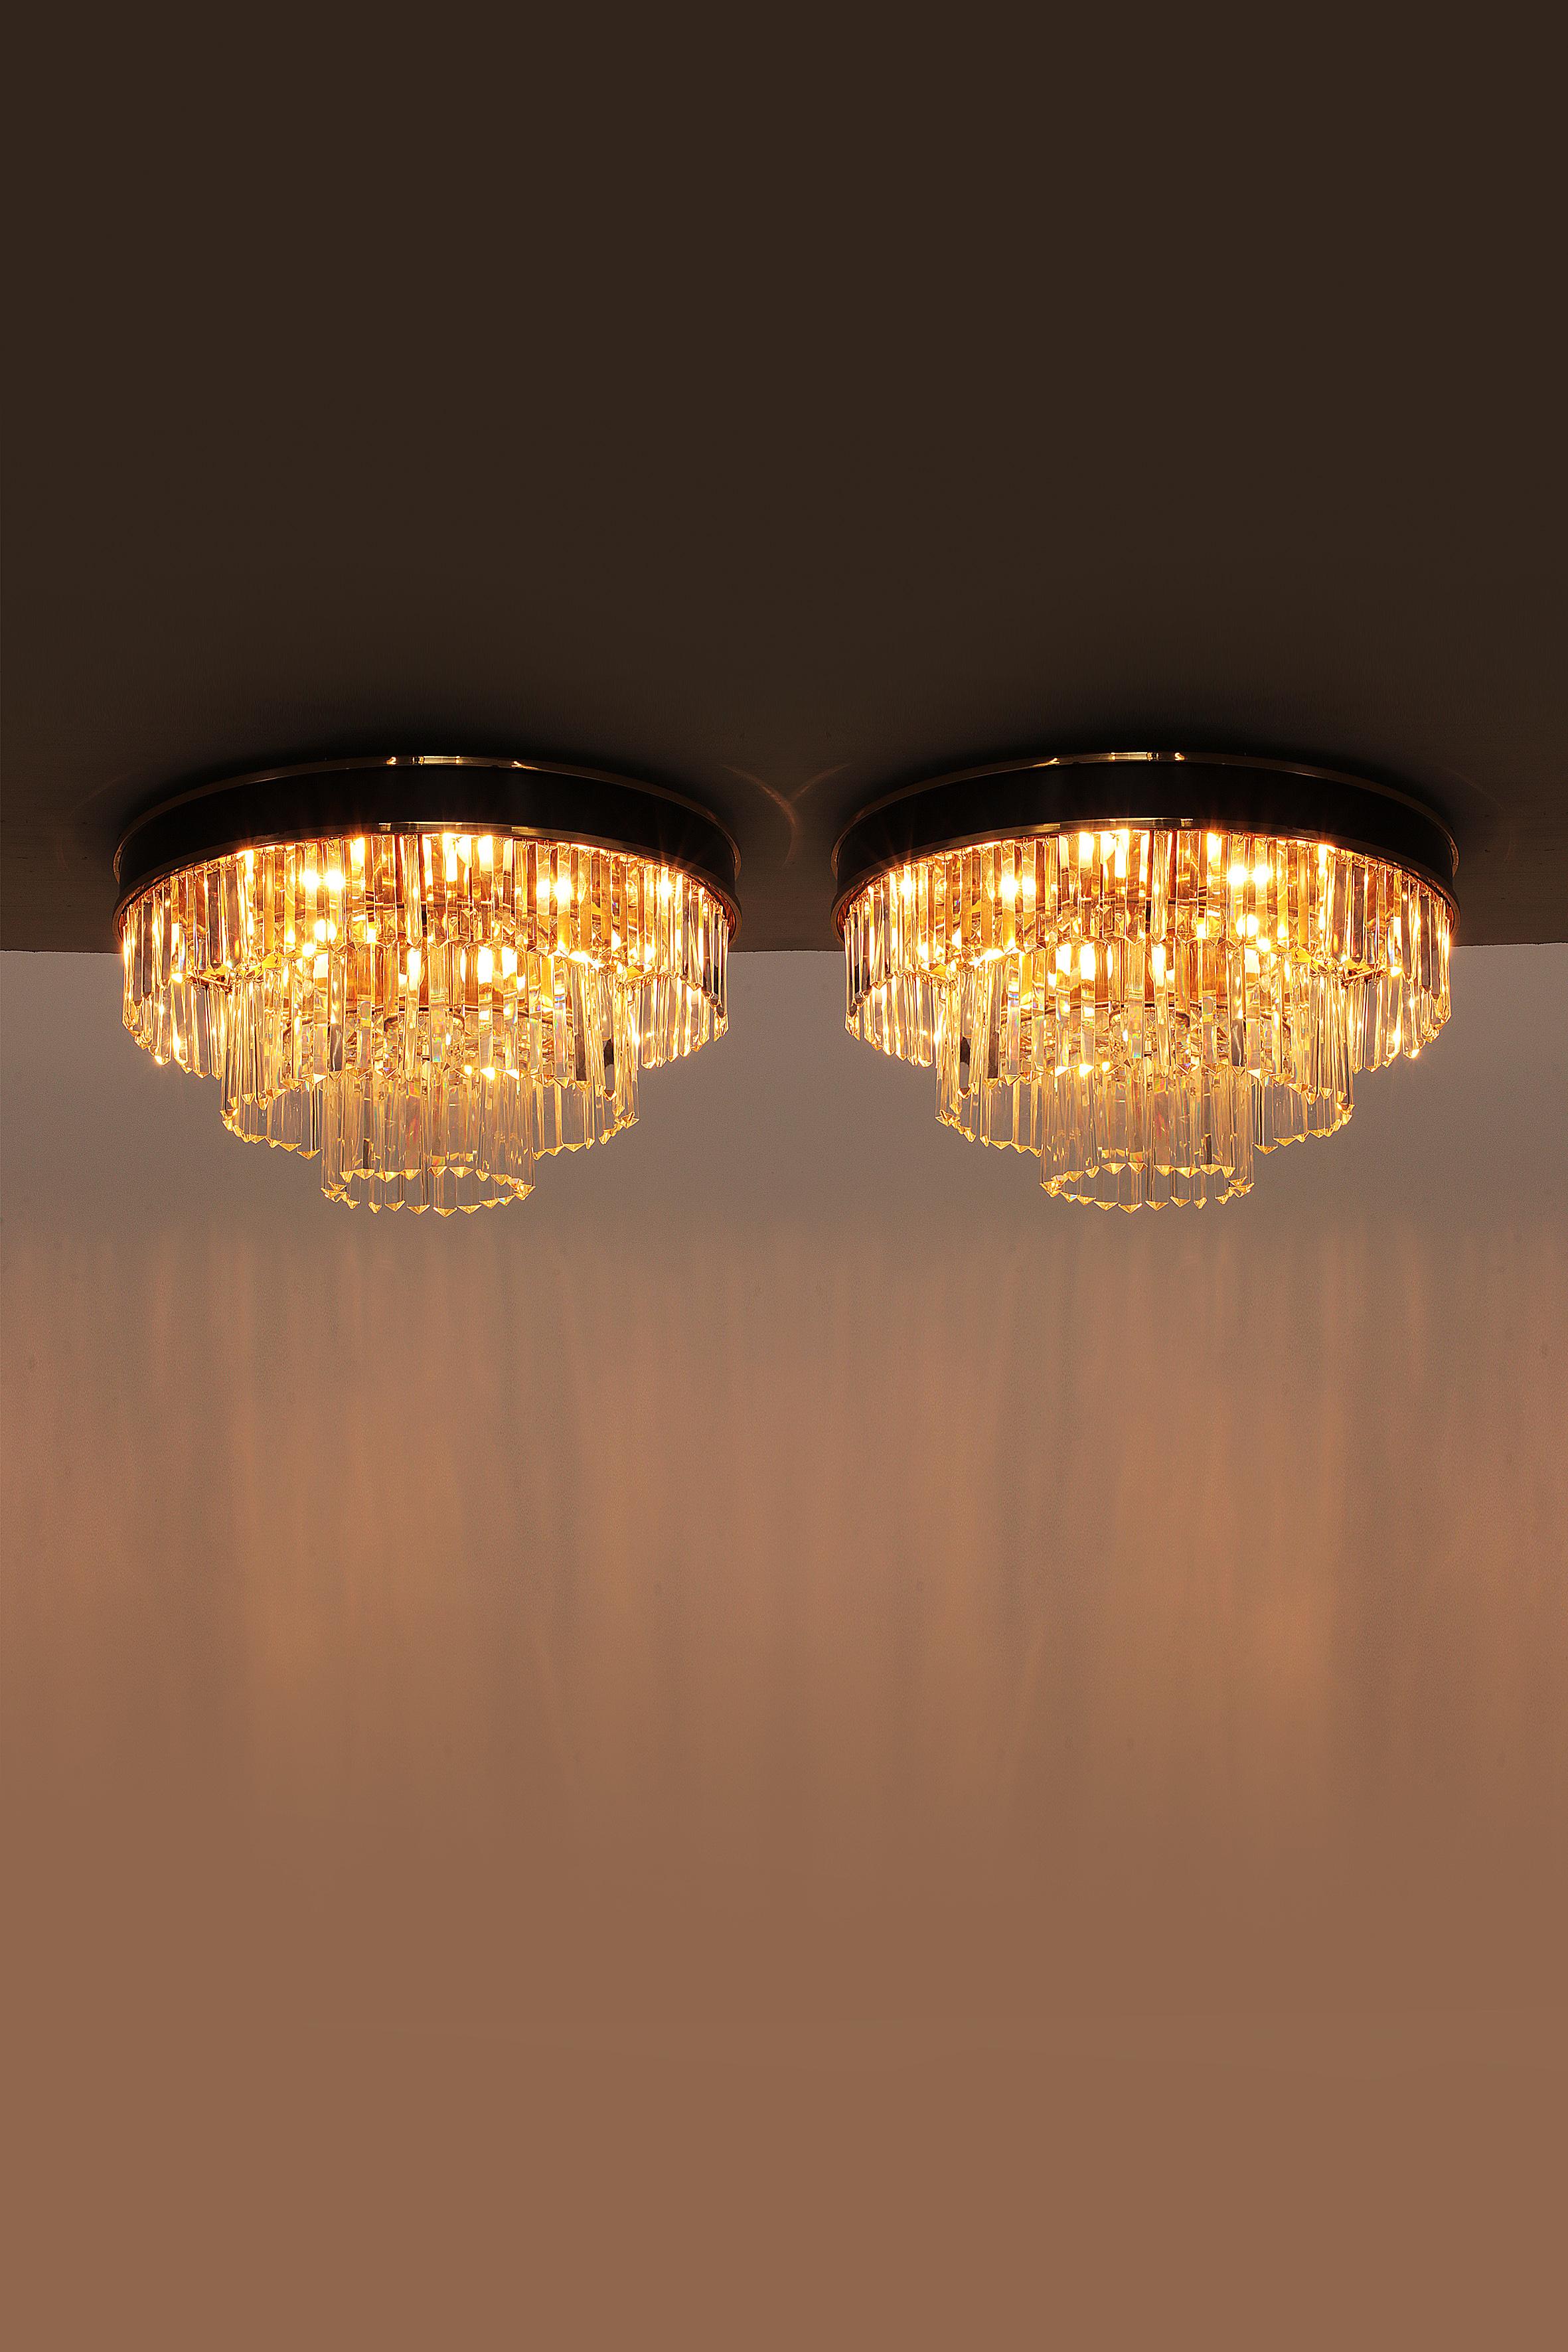 Hollywood Regency Gold-Plated Crystal Ceiling Lamps by L.A. Riedinger, Germay 1960 For Sale